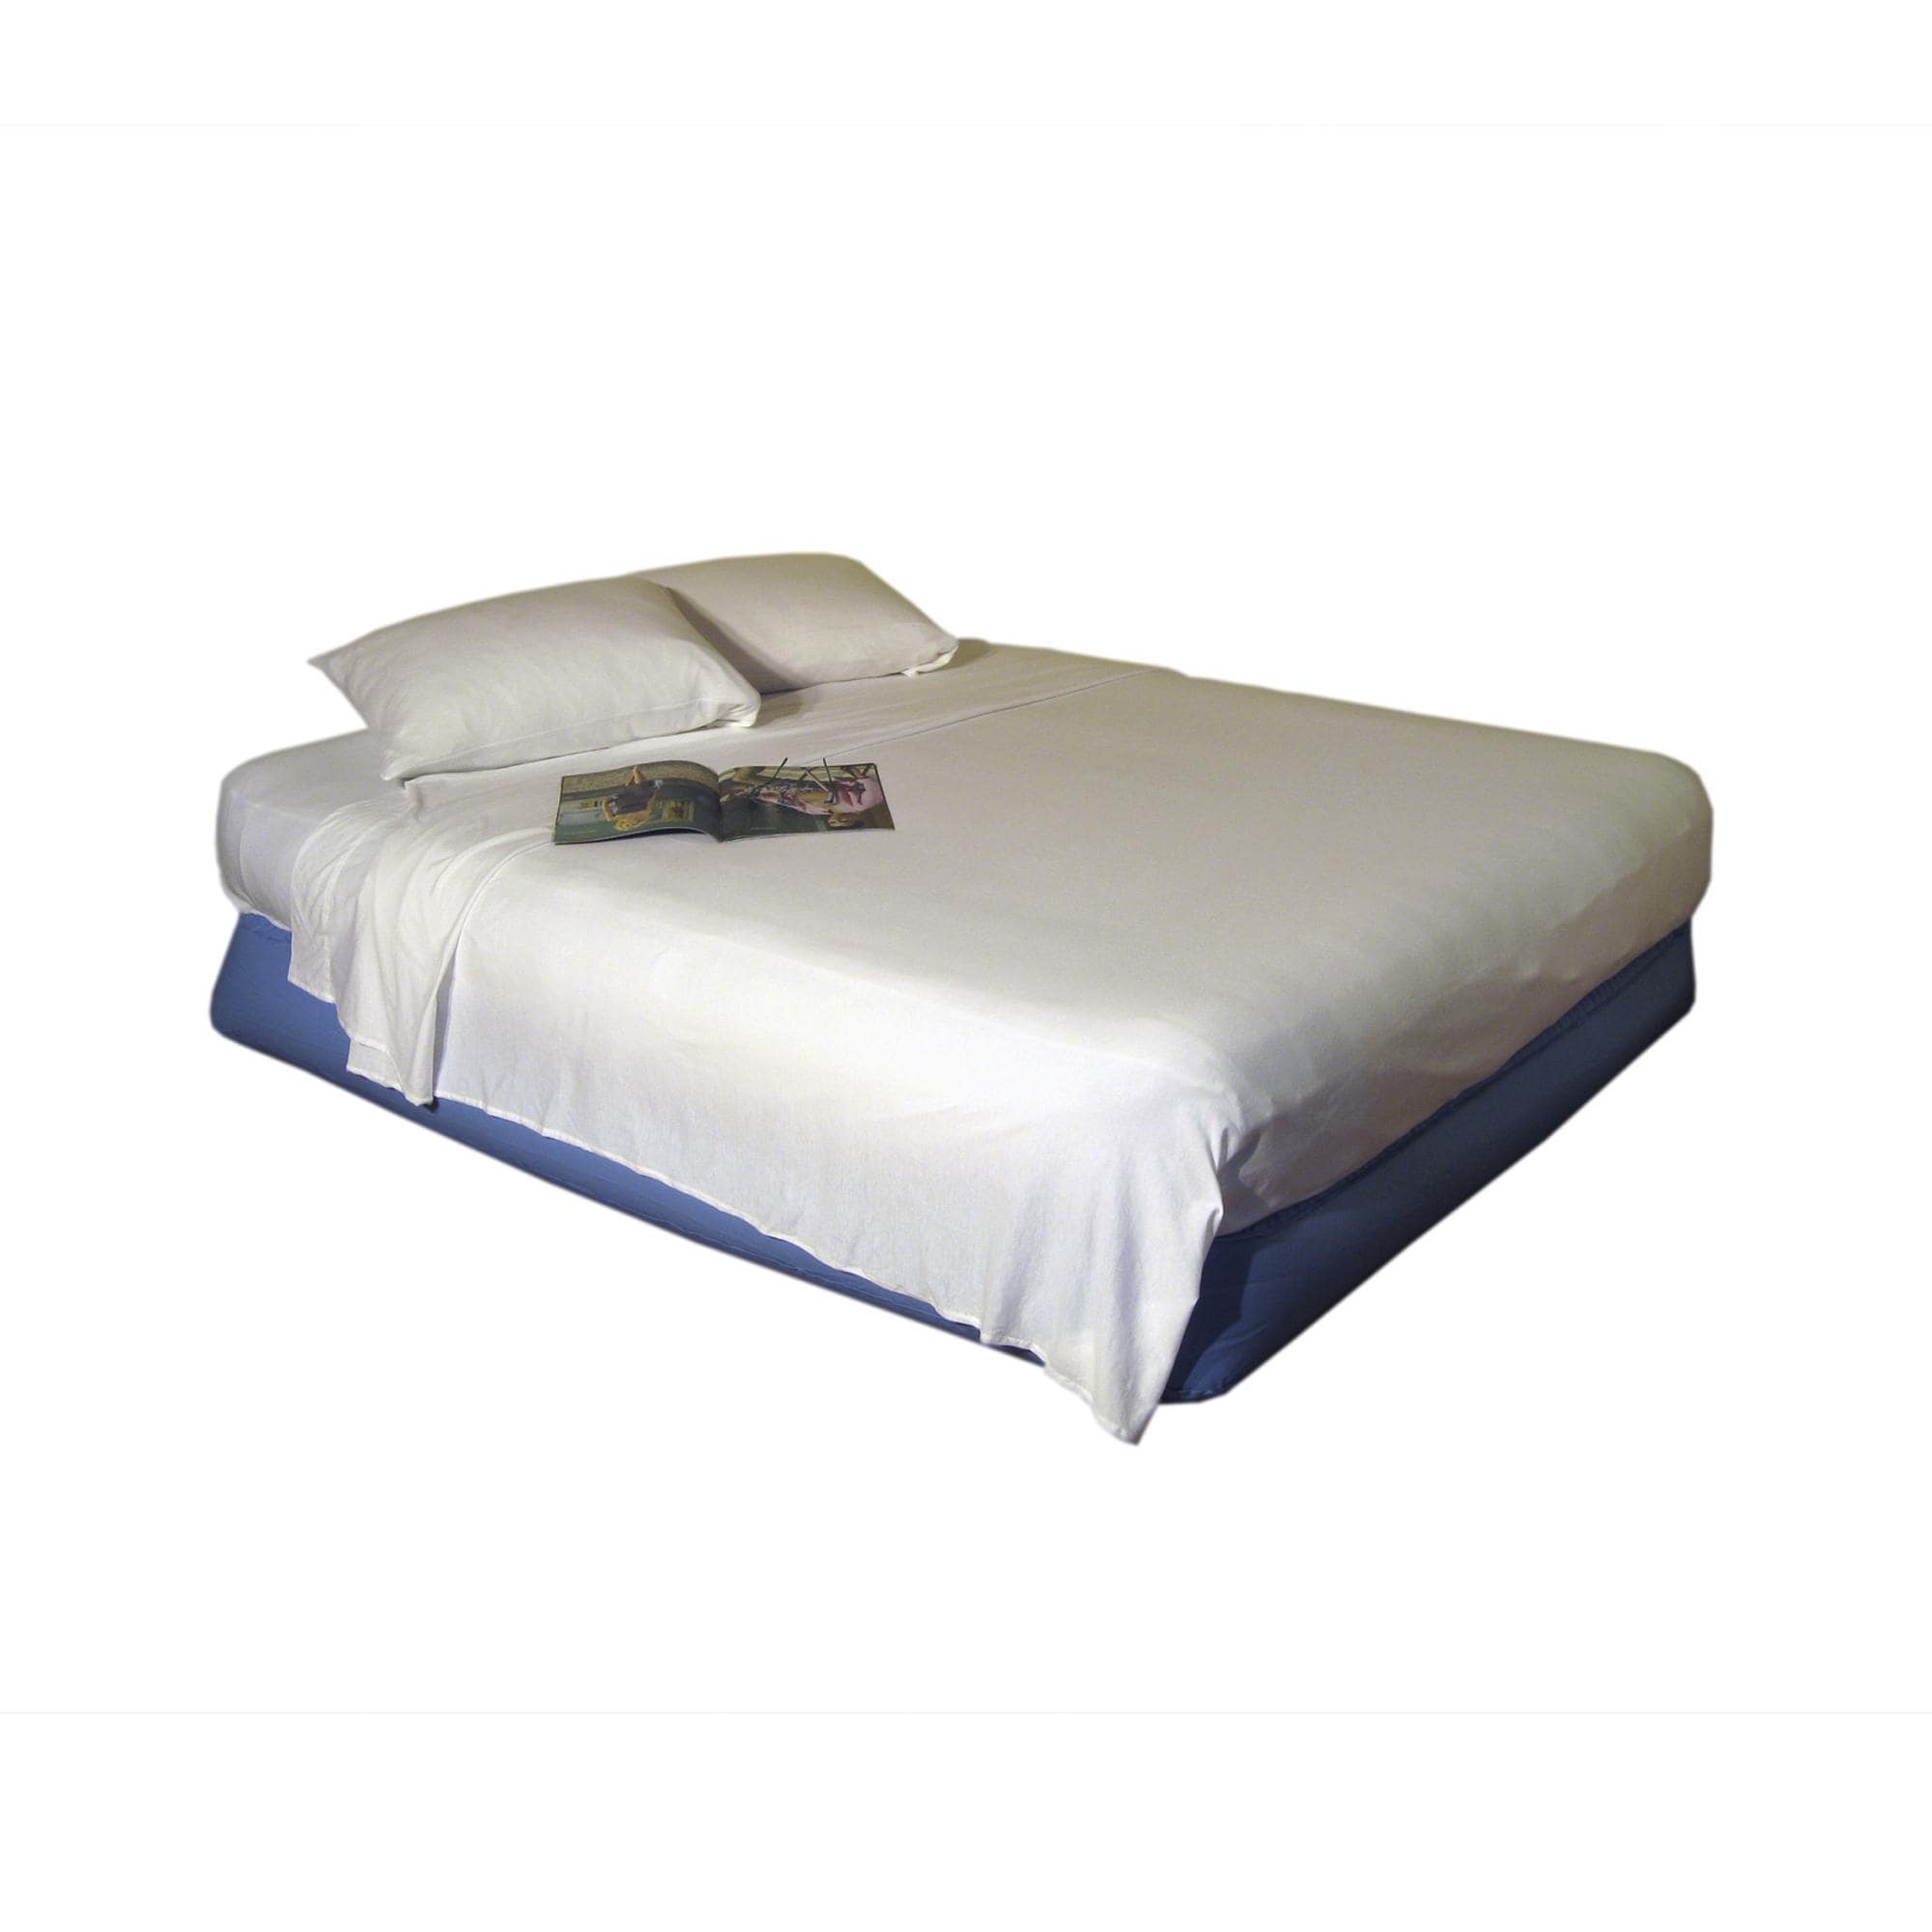 https://ak1.ostkcdn.com/images/products/5515473/Full-size-Airbed-Cotton-Jersey-Sheet-Set-21c990e0-648d-4bc4-ab1e-fea55b092292.jpg